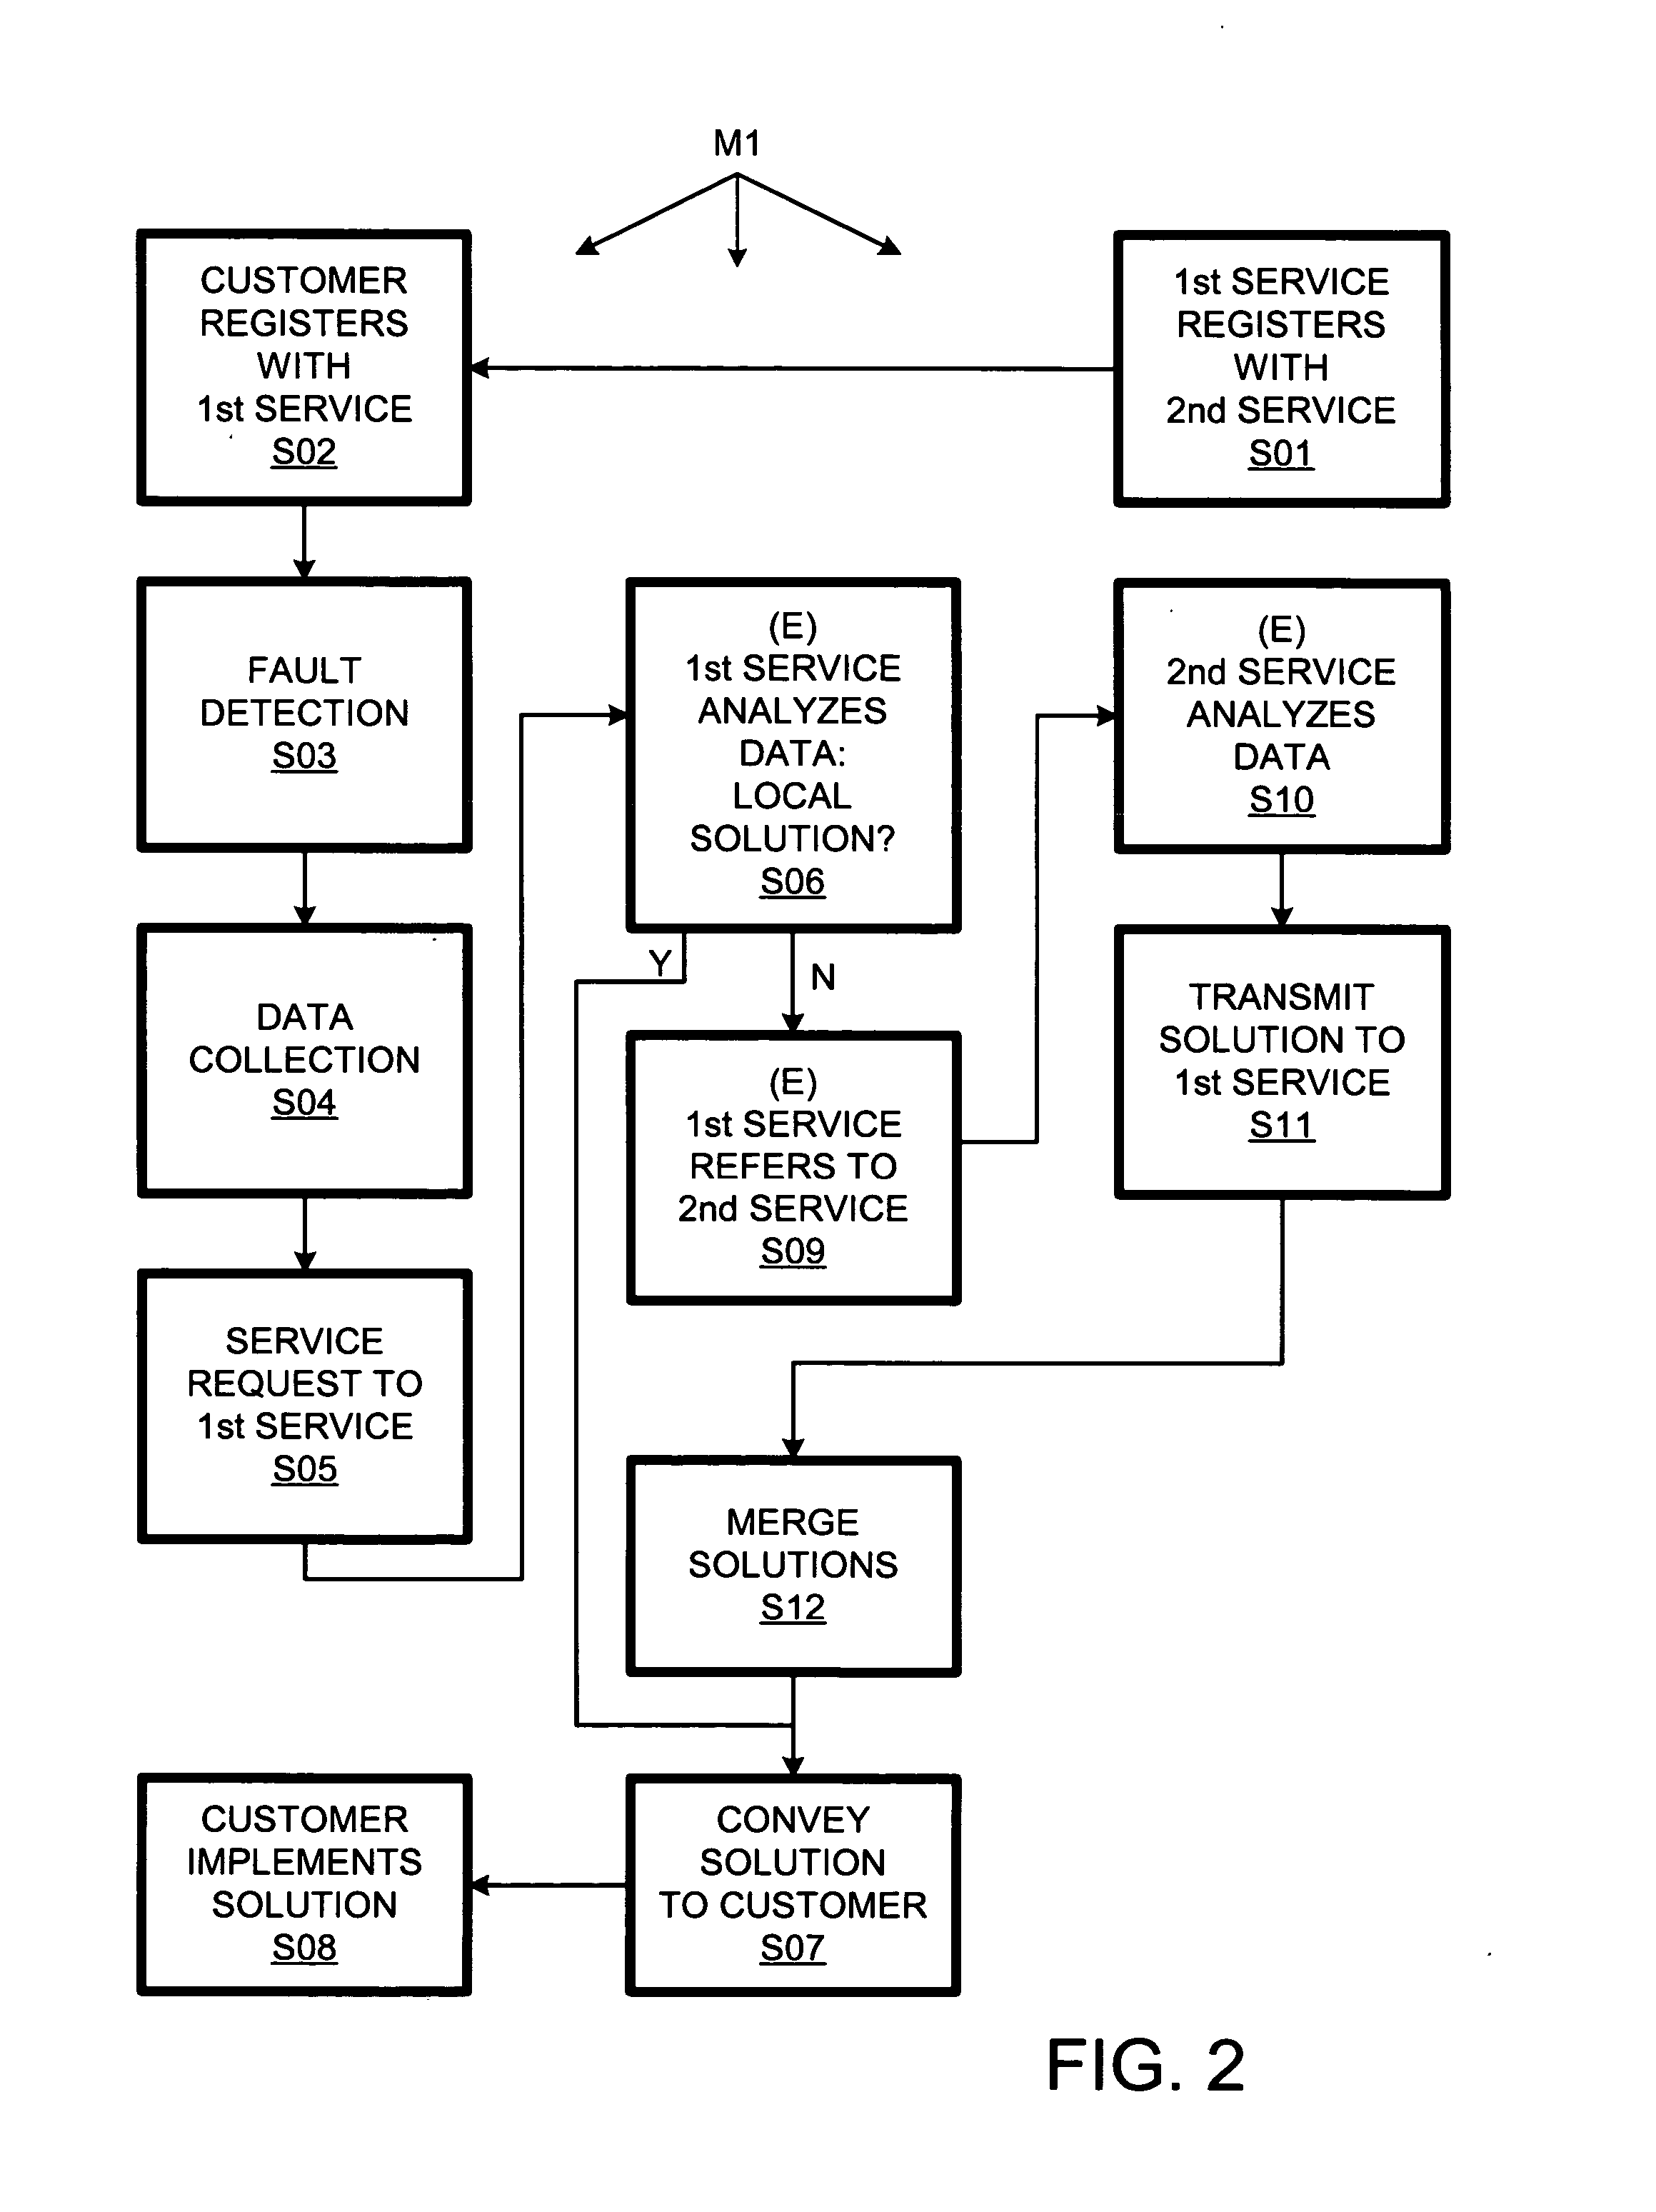 Tiered multi-source software support using automated diagnostic-data transfers